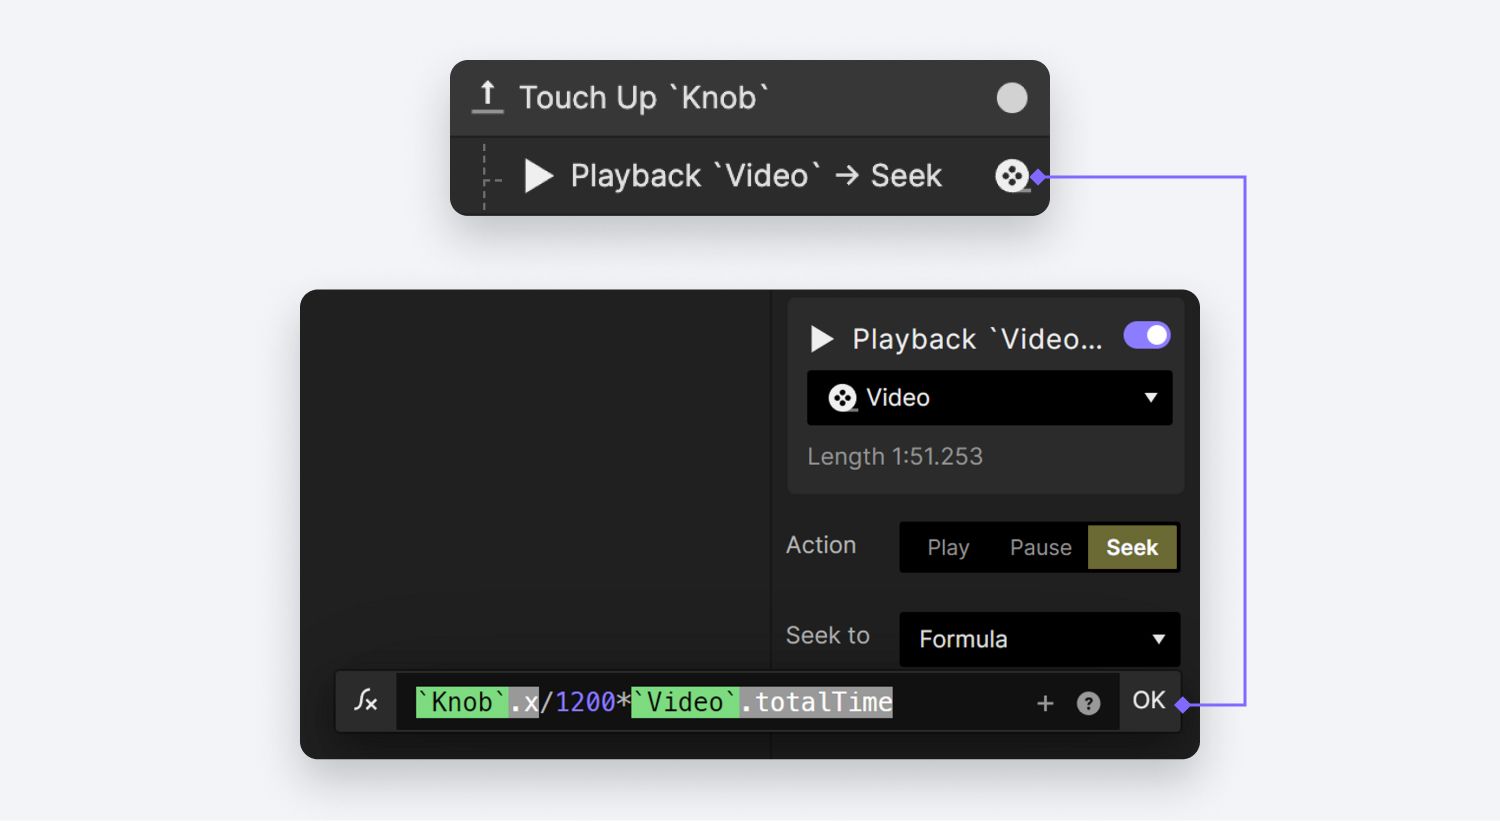 Set up a Playback response for the Video layer.